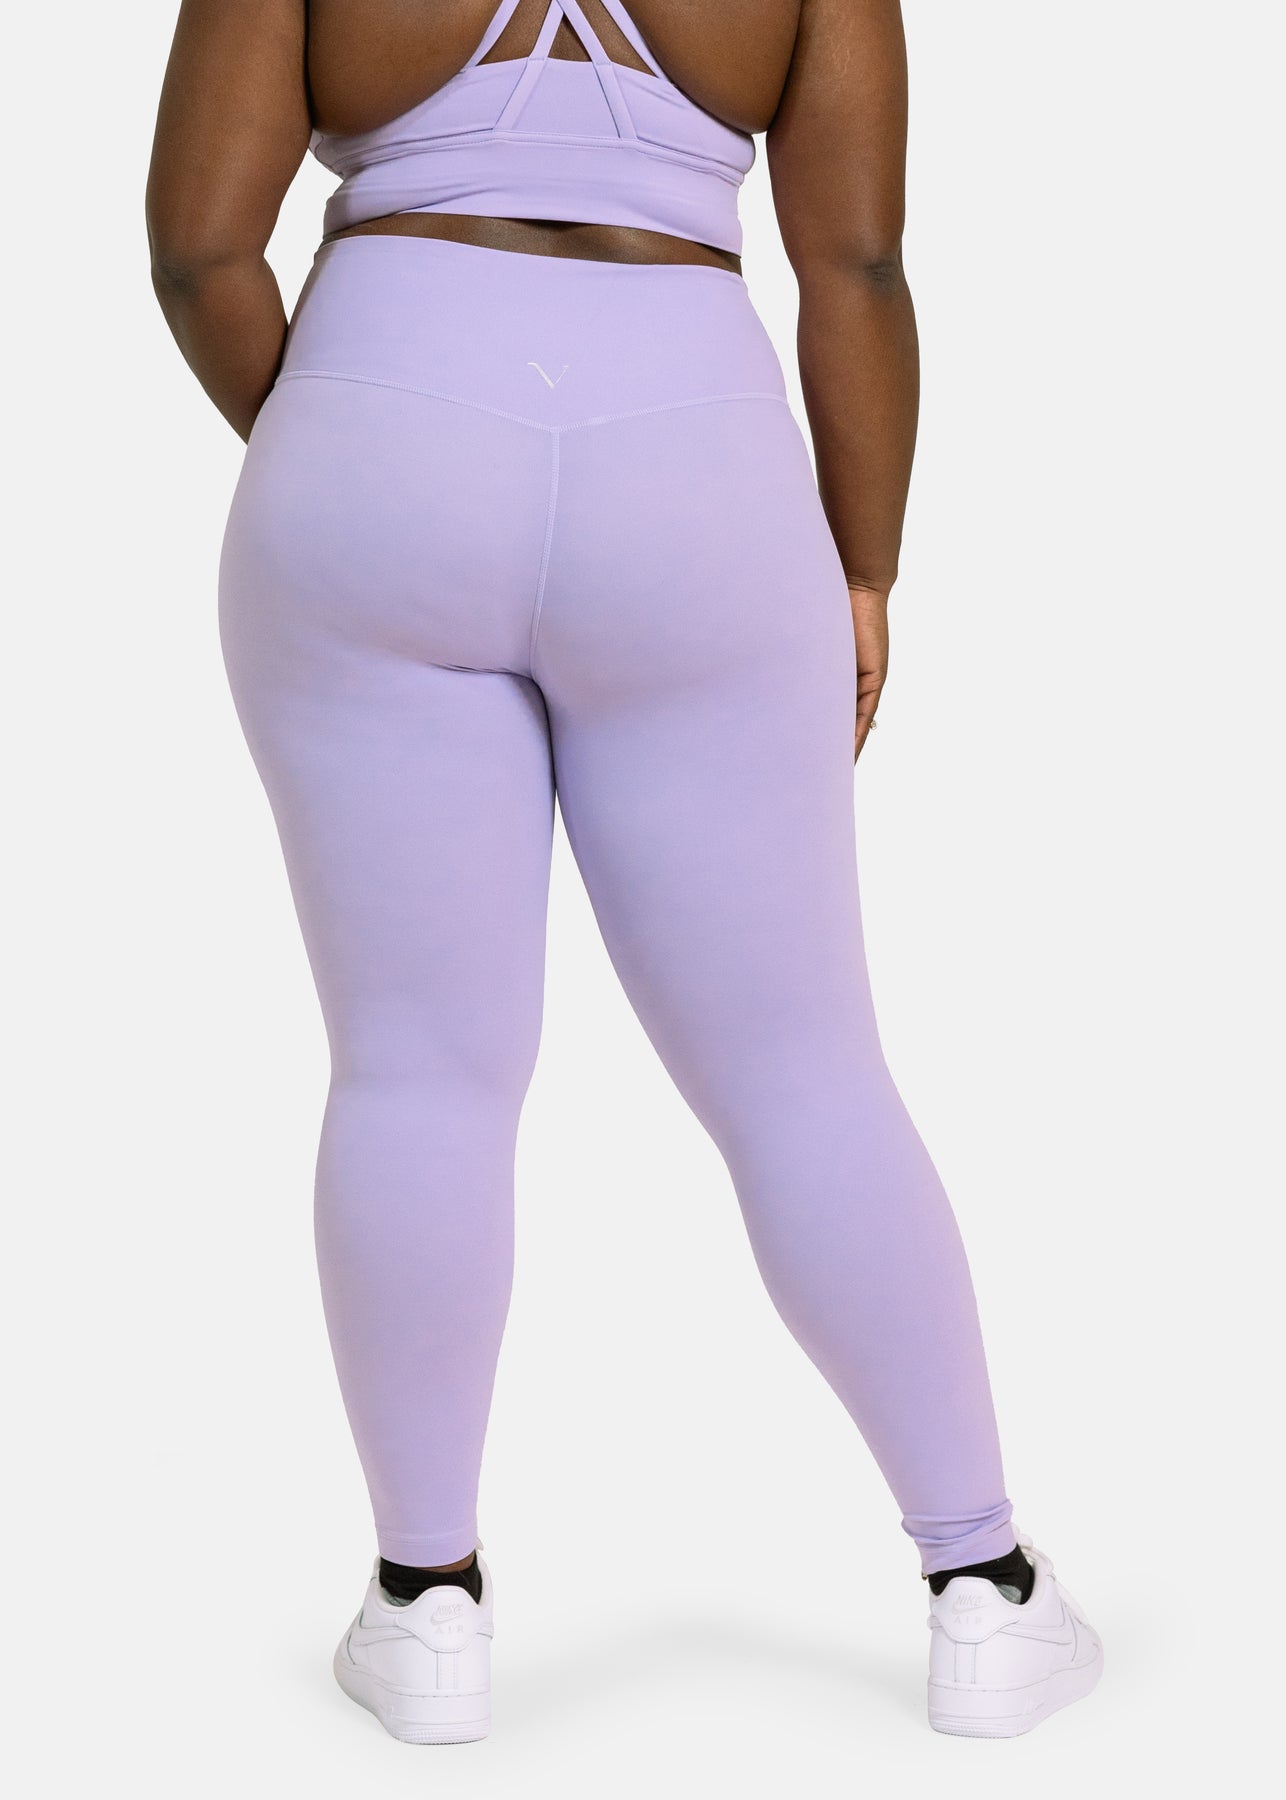 thebridleboutique  (PLEASE NOTE OUR 2023 BATCH HAVE RICE PATTERN SILICONE  PRINT NOT THE STAR PATTERN)Our Mare Ware Equestrian Riding Leggings are  made from a technical compression, lycra material that is extremely